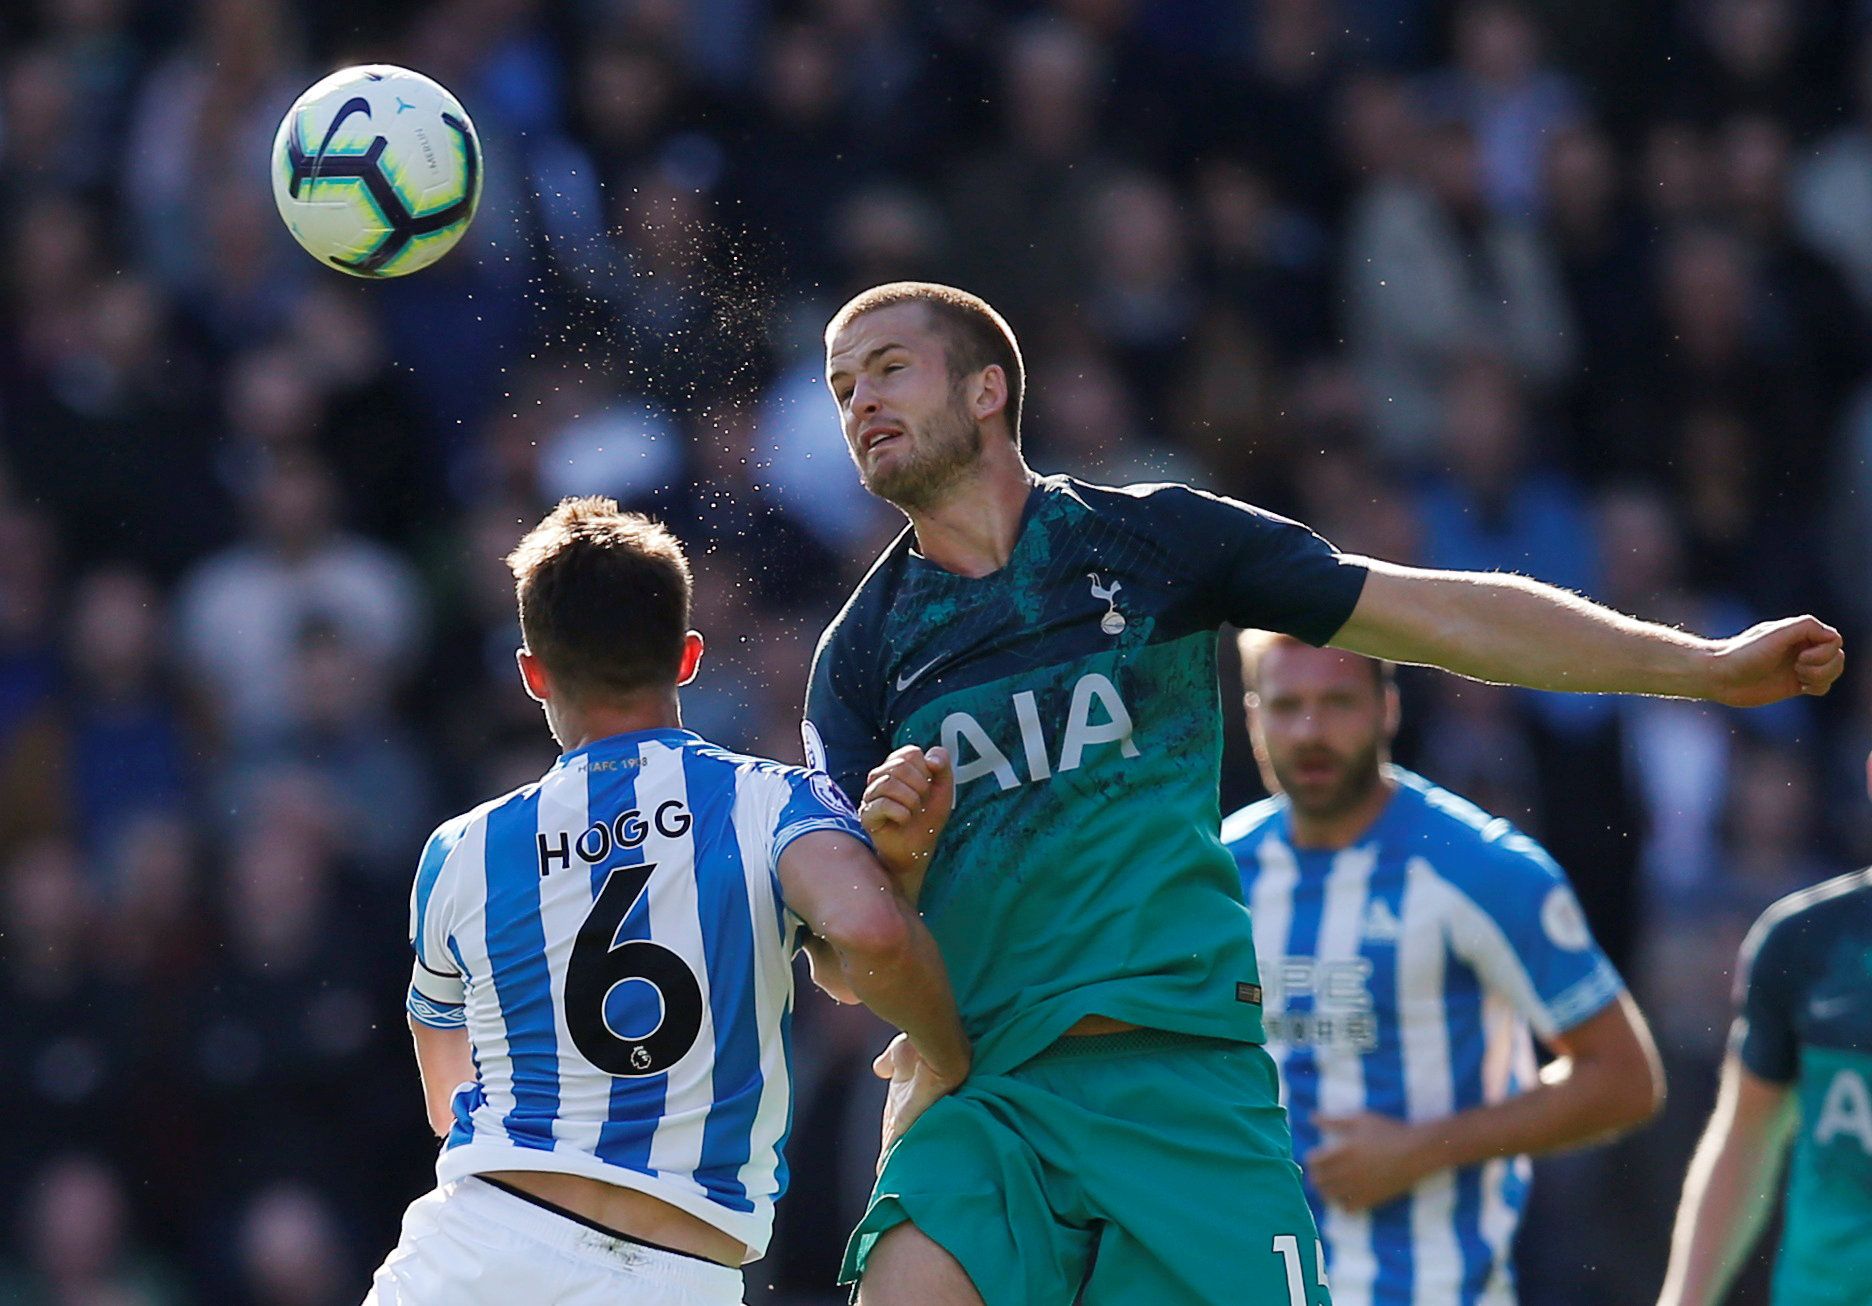 Soccer Football - Premier League - Huddersfield Town v Tottenham Hotspur - John Smith's Stadium, Huddersfield, Britain - September 29, 2018 Tottenham's Eric Dier in action with Huddersfield Town's Jonathan Hogg   REUTERS/Andrew Yates  EDITORIAL USE ONLY. No use with unauthorized audio, video, data, fixture lists, club/league logos or 